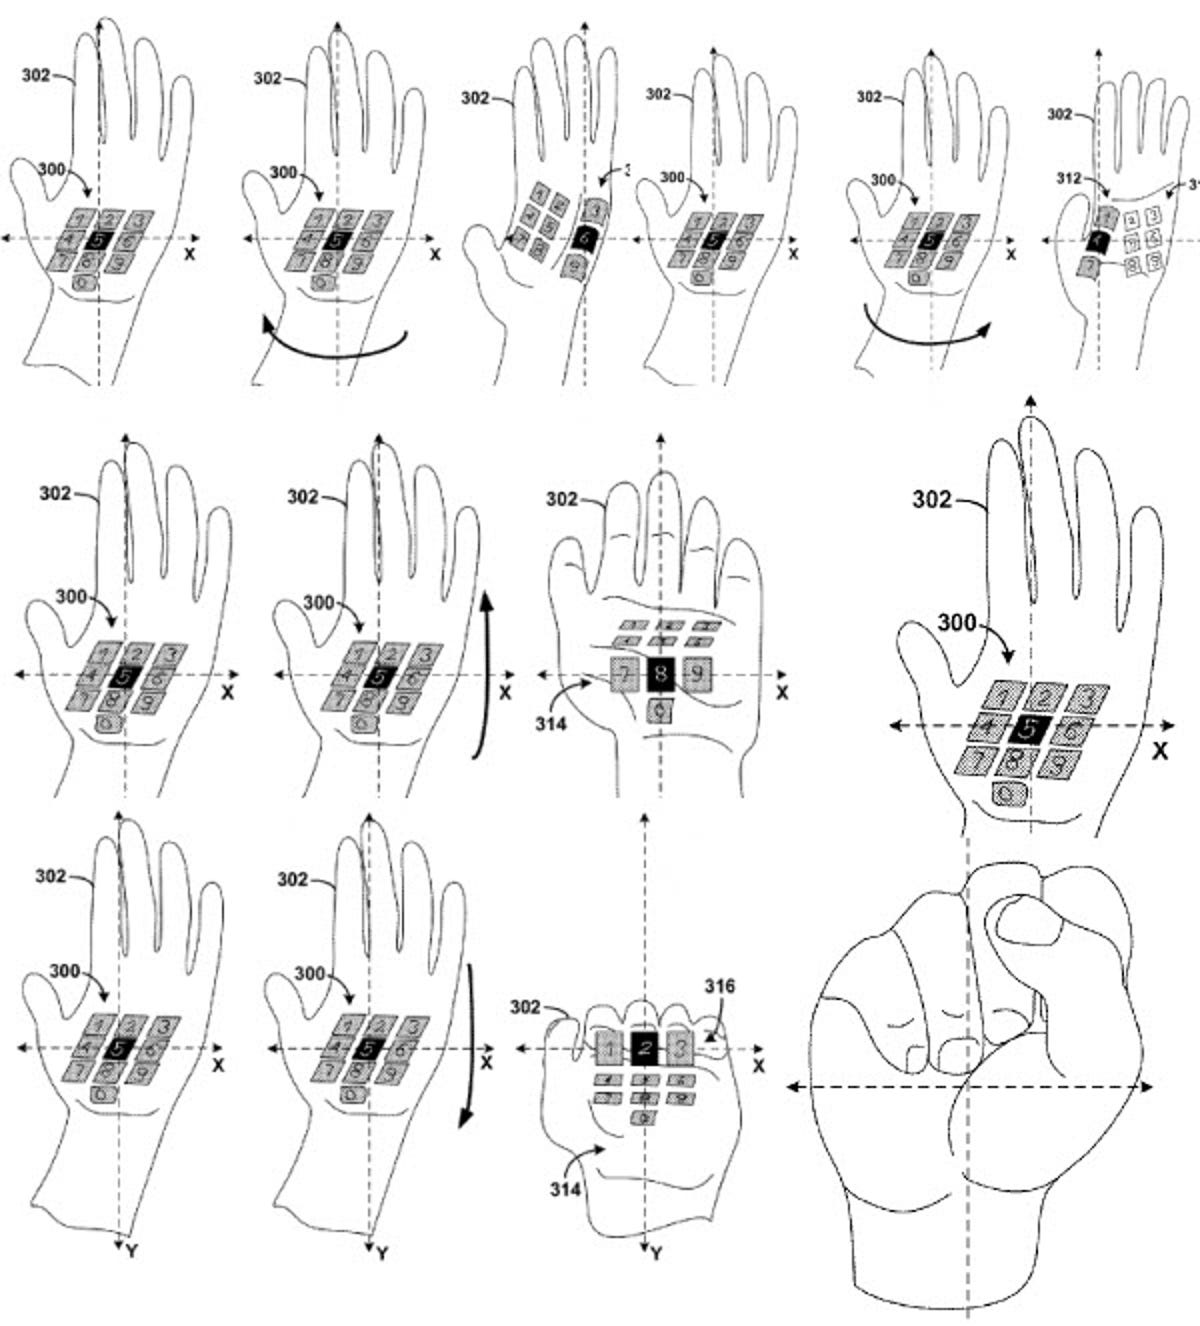 The laser keyboard projected on to the hand, communicating back to the glasses' camera using gestures.